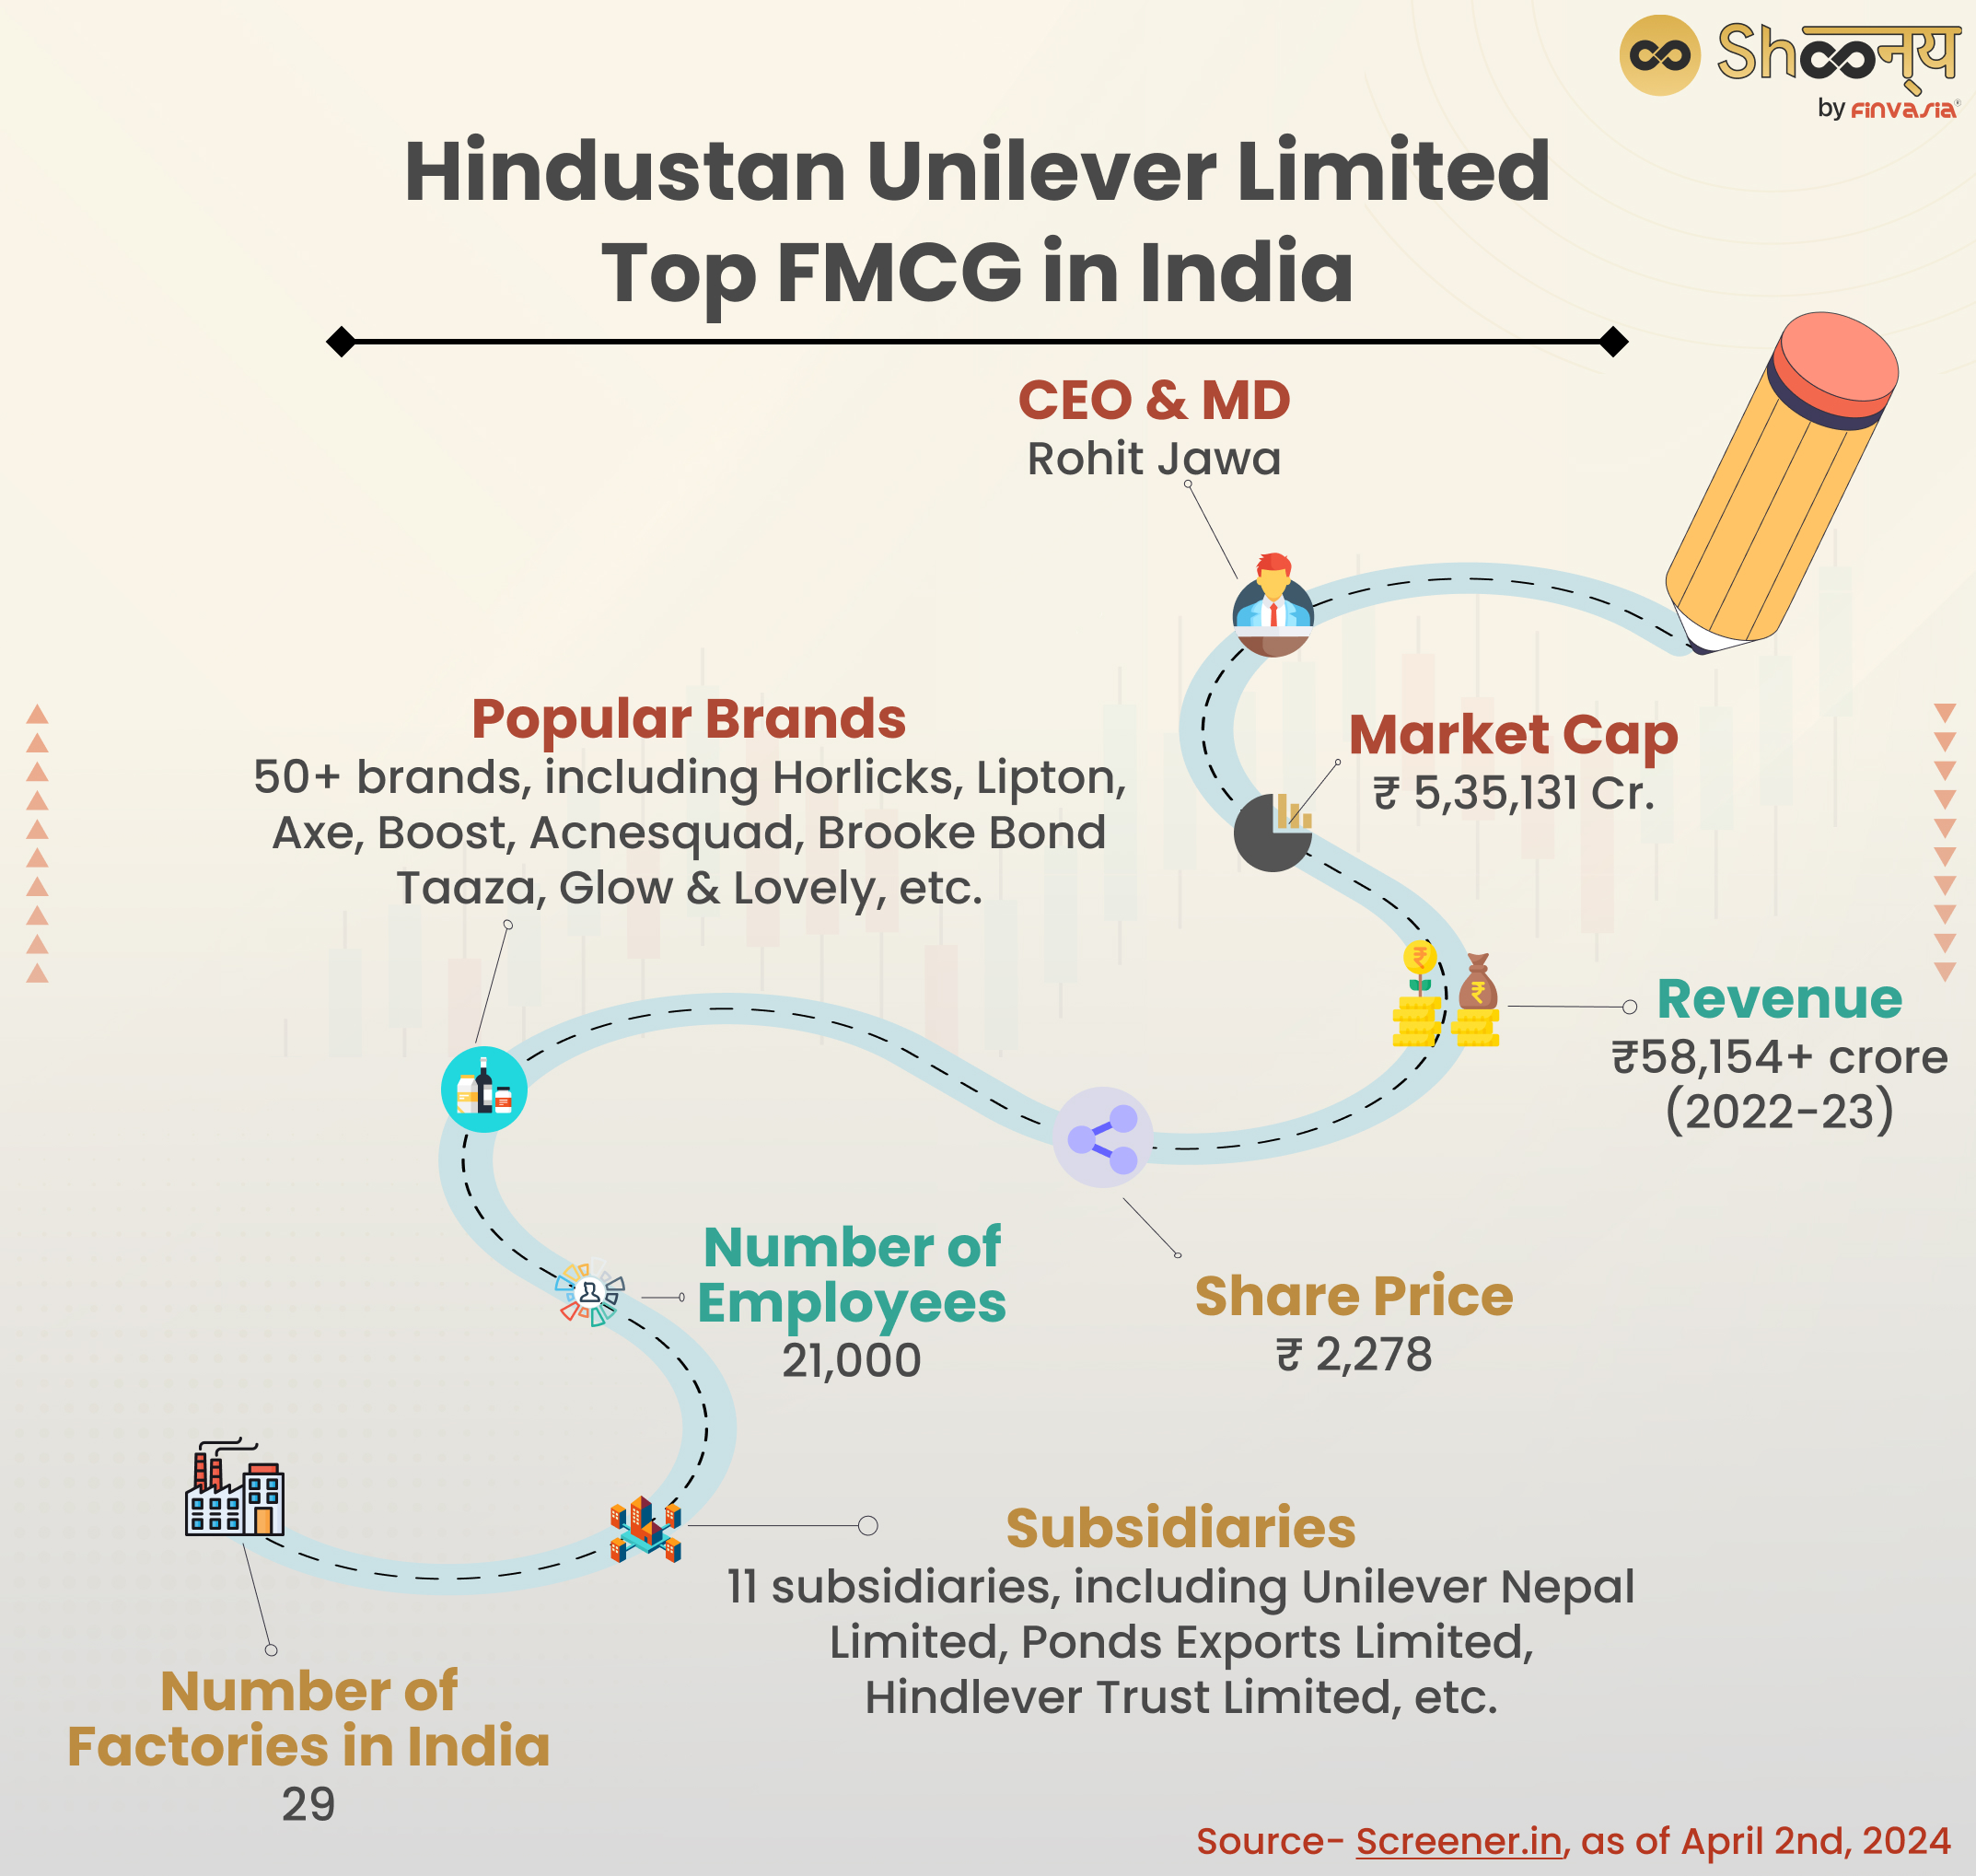 Hindustan Unilever Limited - Top FMCG in India